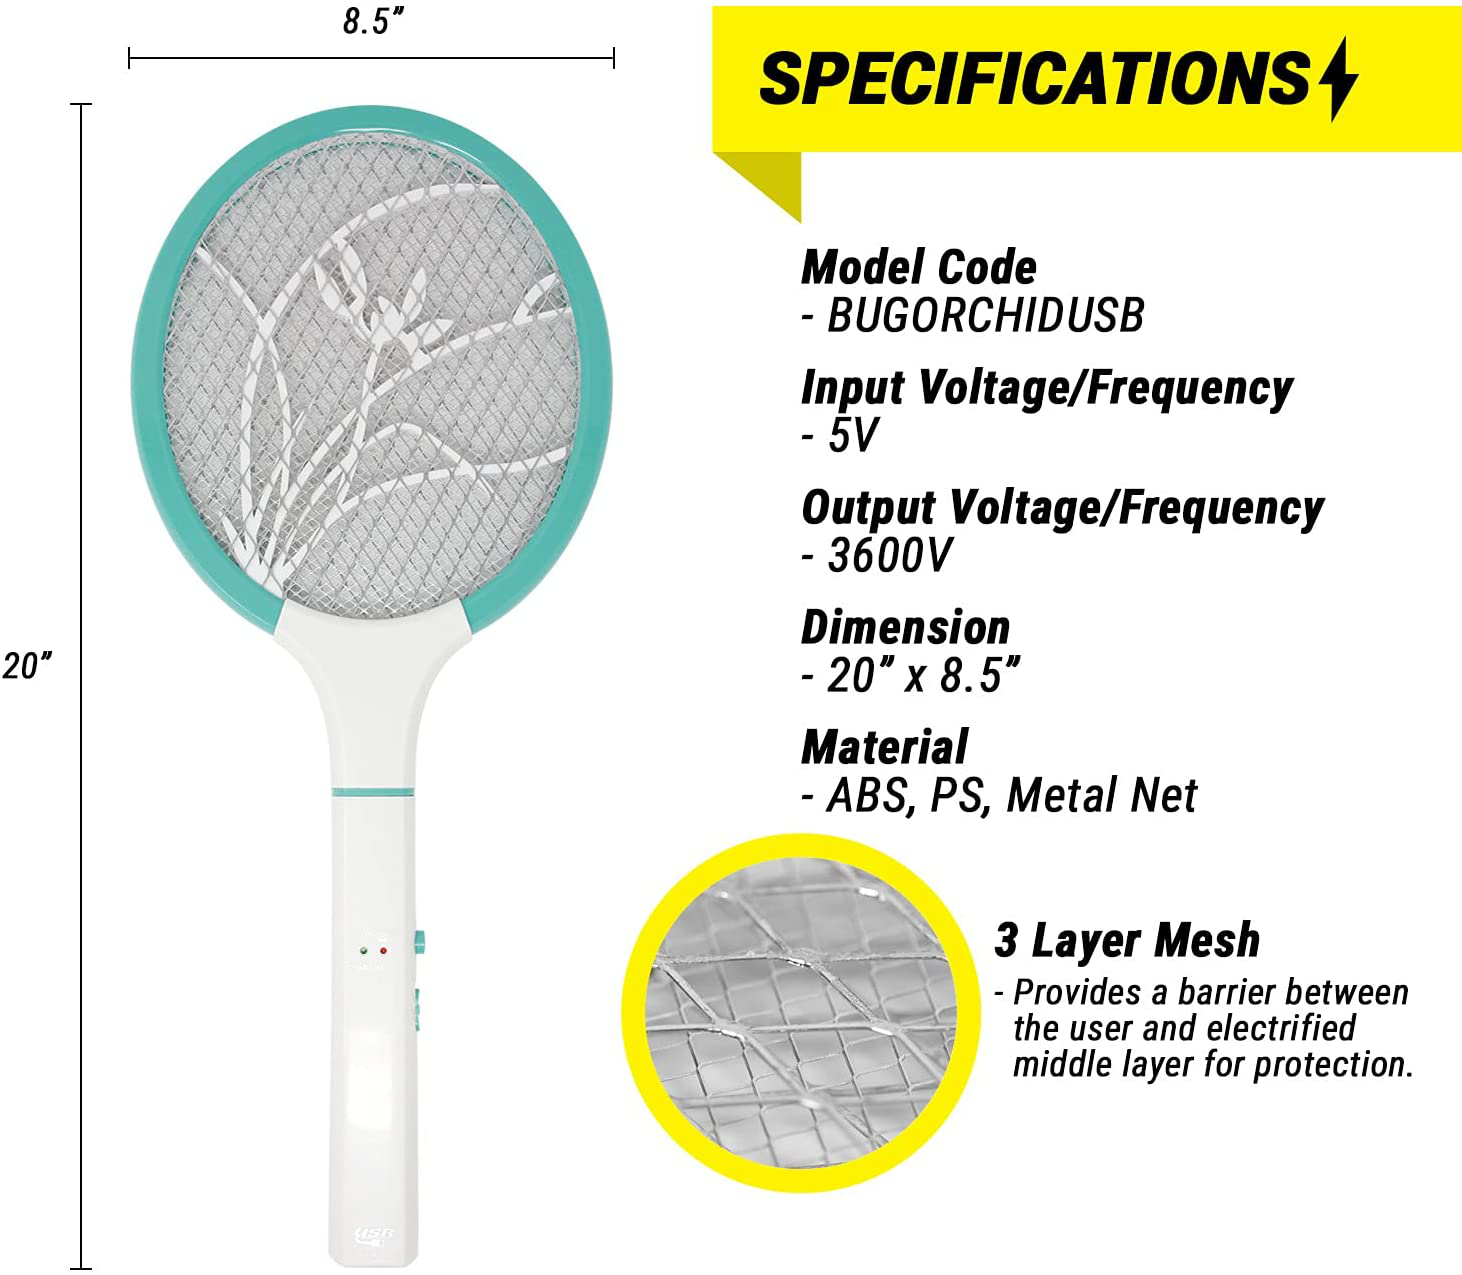 BugKwikZap 2PK of USB Rechargeable Electric Bug Zapper 3600V, Mosquito Killer Racket, Rechargeable Battery Powered Fly Swatter Great for Home, Outdoor Picnics (White-Aqua)